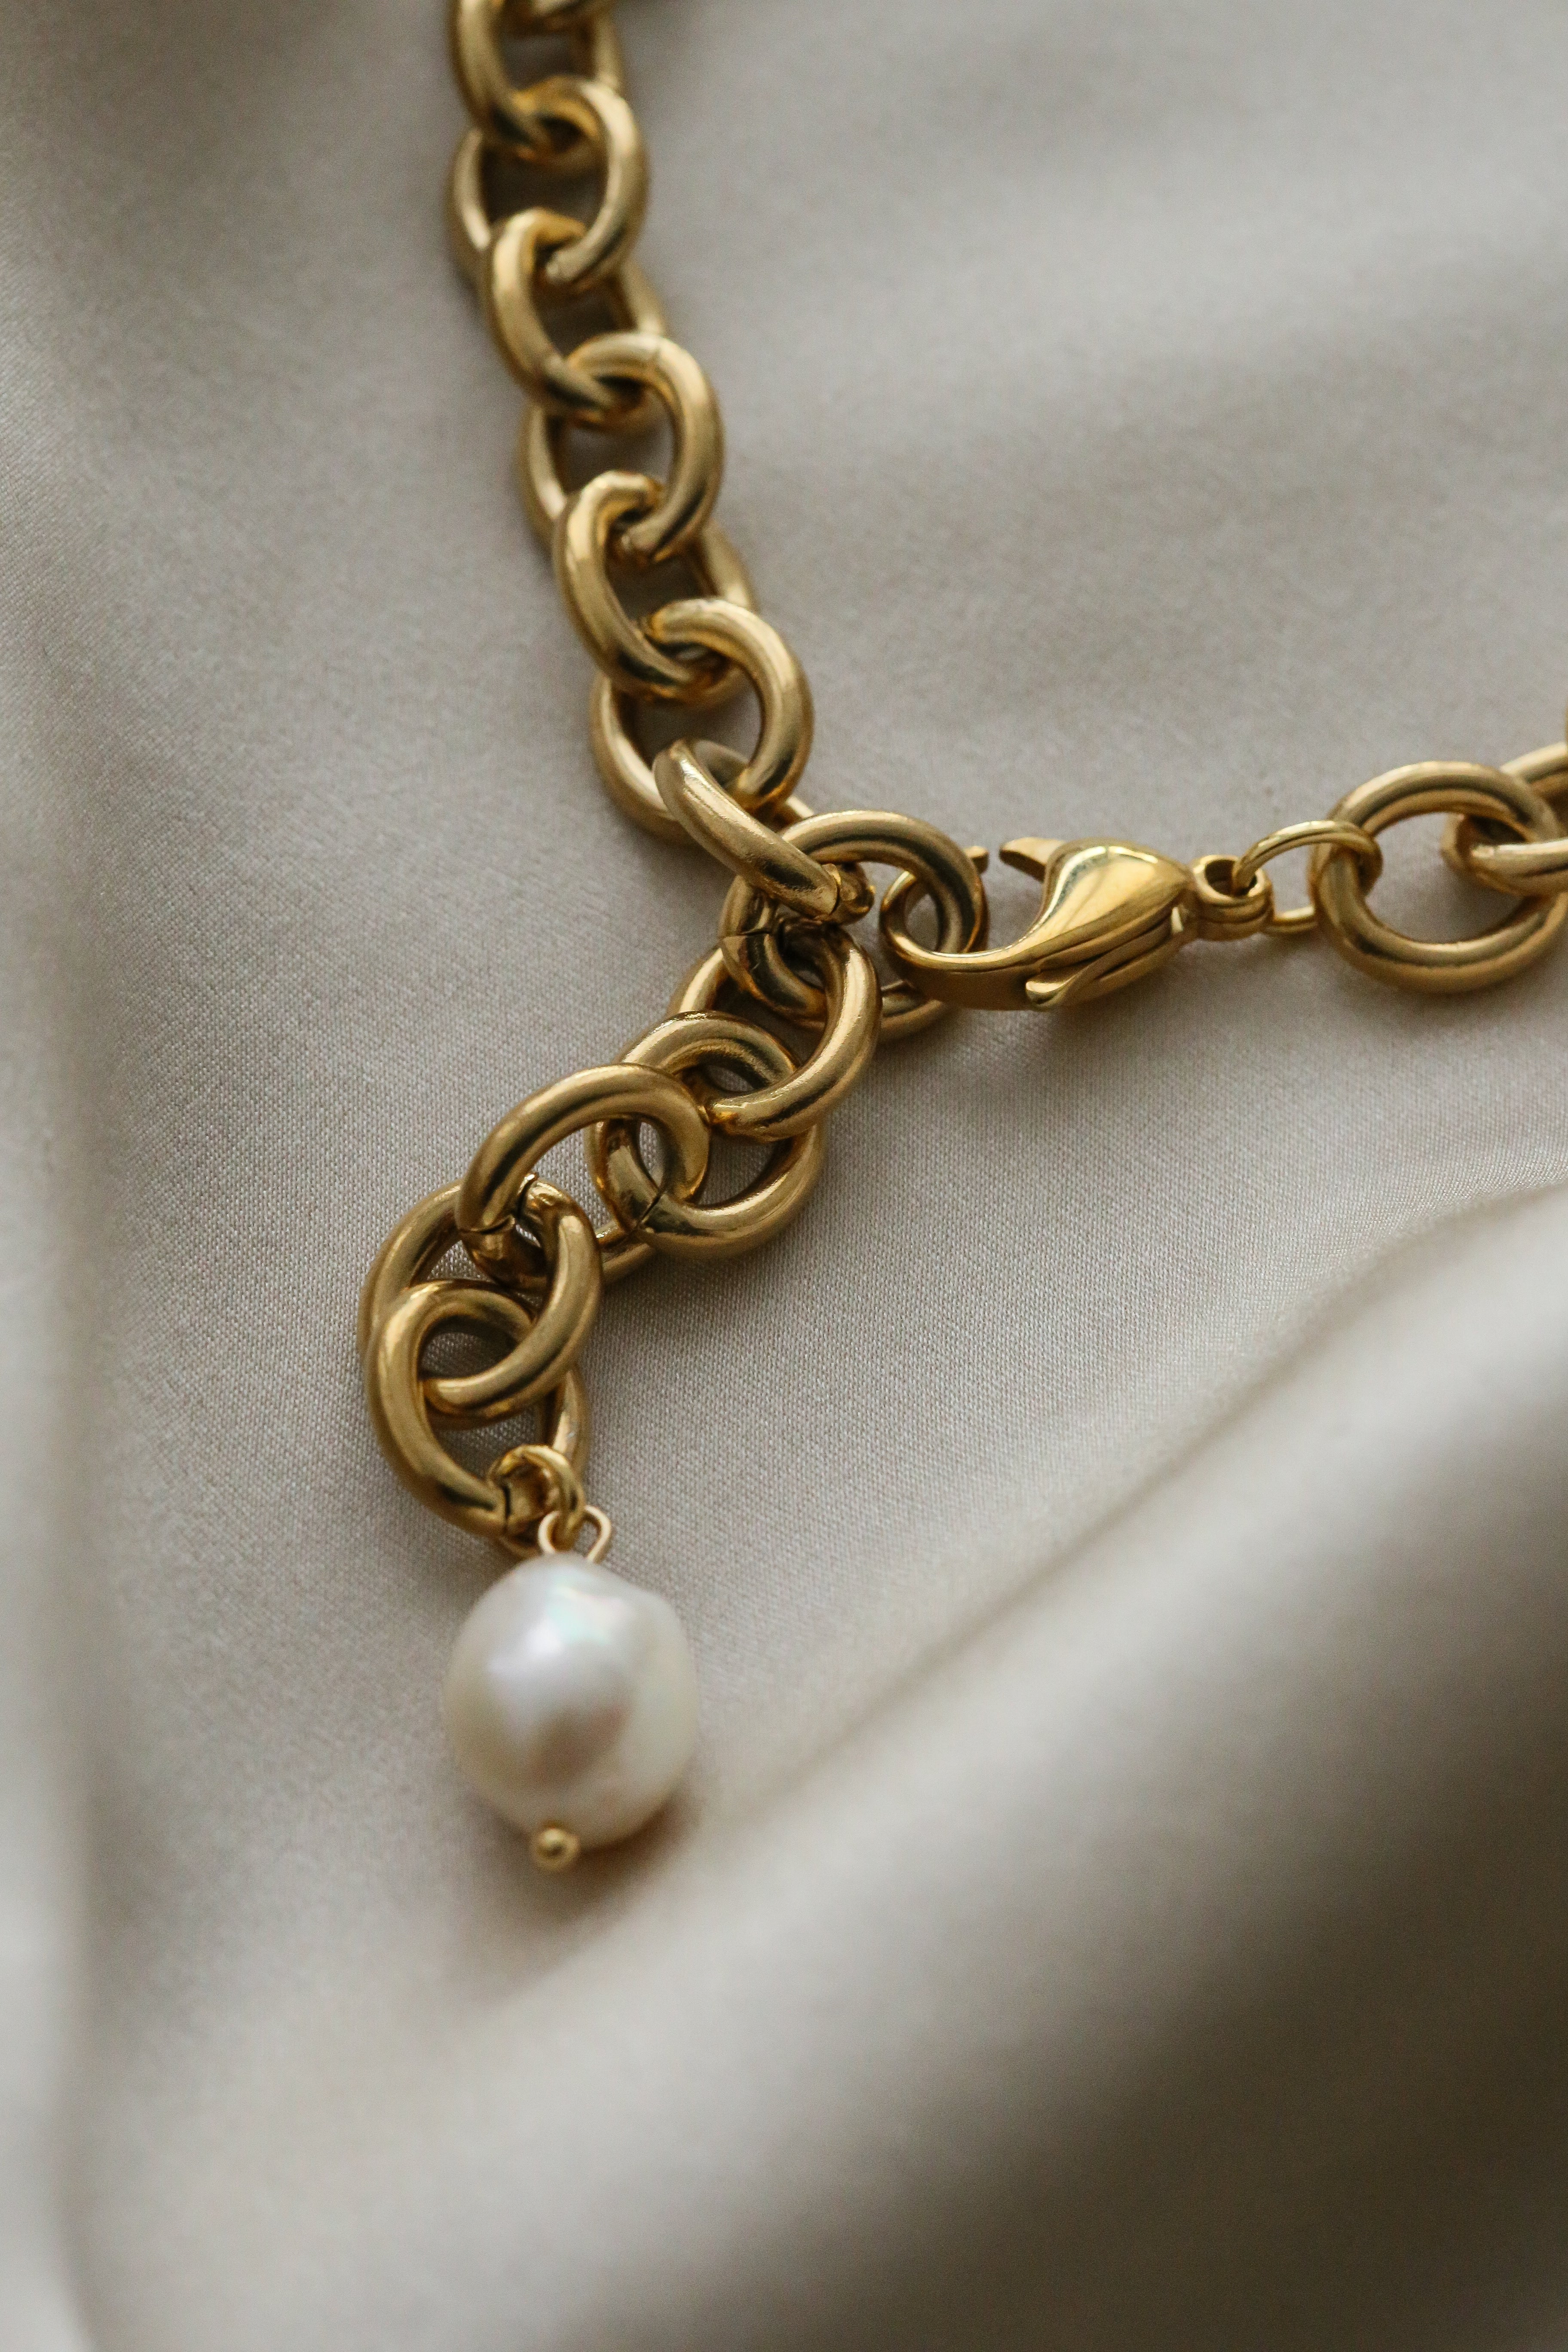 Vanessa Anklet - Boutique Minimaliste has waterproof, durable, elegant and vintage inspired jewelry